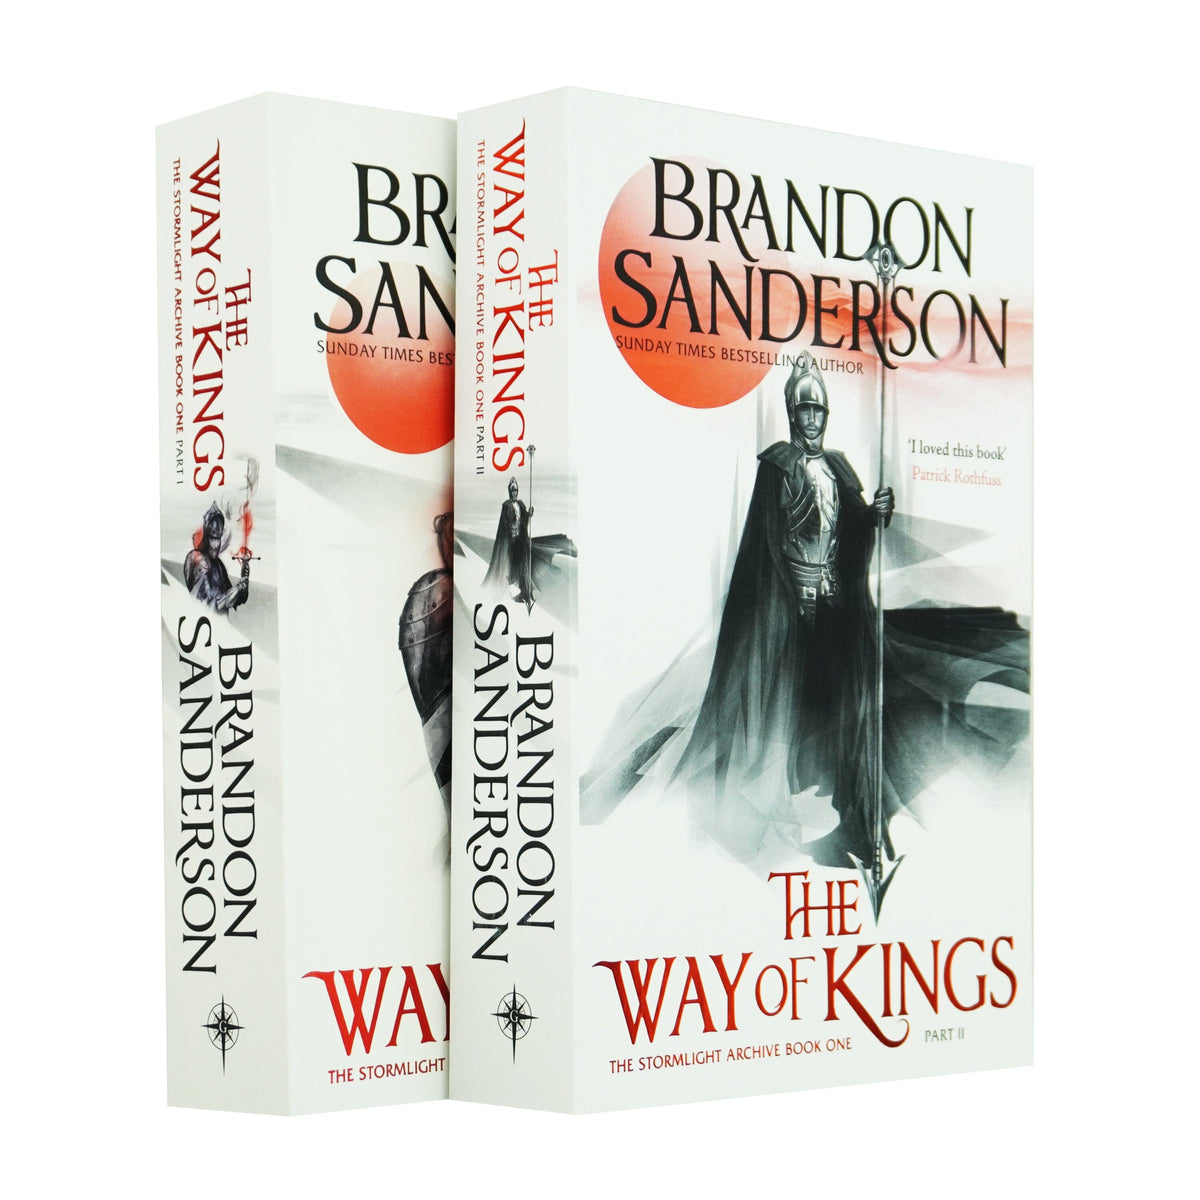 The Stormlight Archive Book One (Part 1 & 2) by Brandon Sanderson 2 Bo —  Books2Door